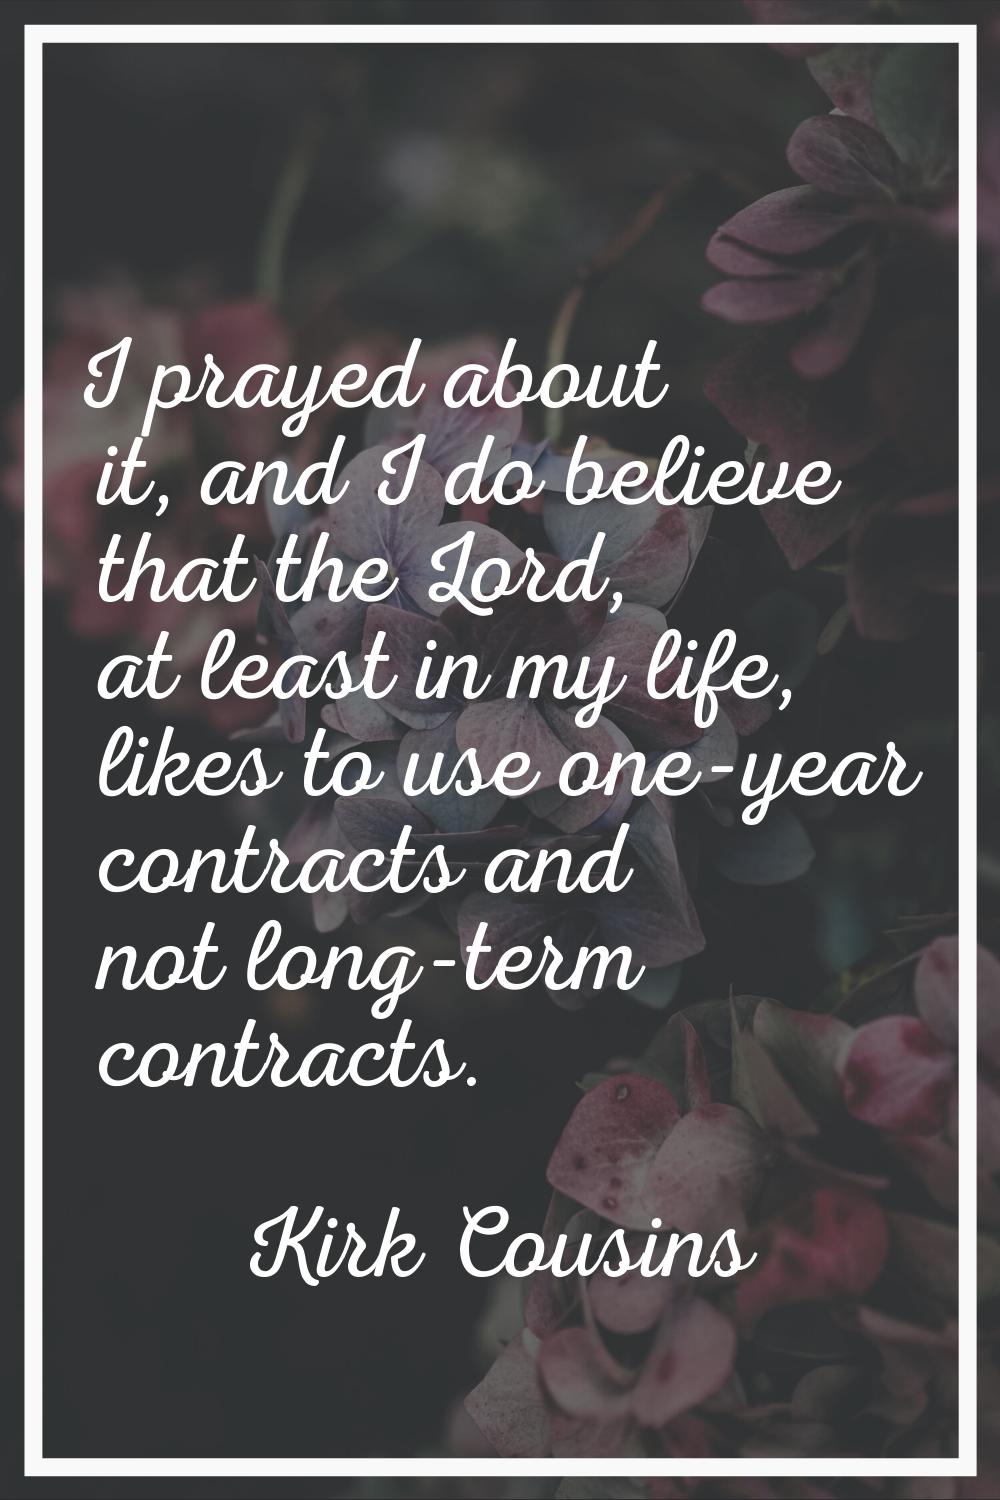 I prayed about it, and I do believe that the Lord, at least in my life, likes to use one-year contr